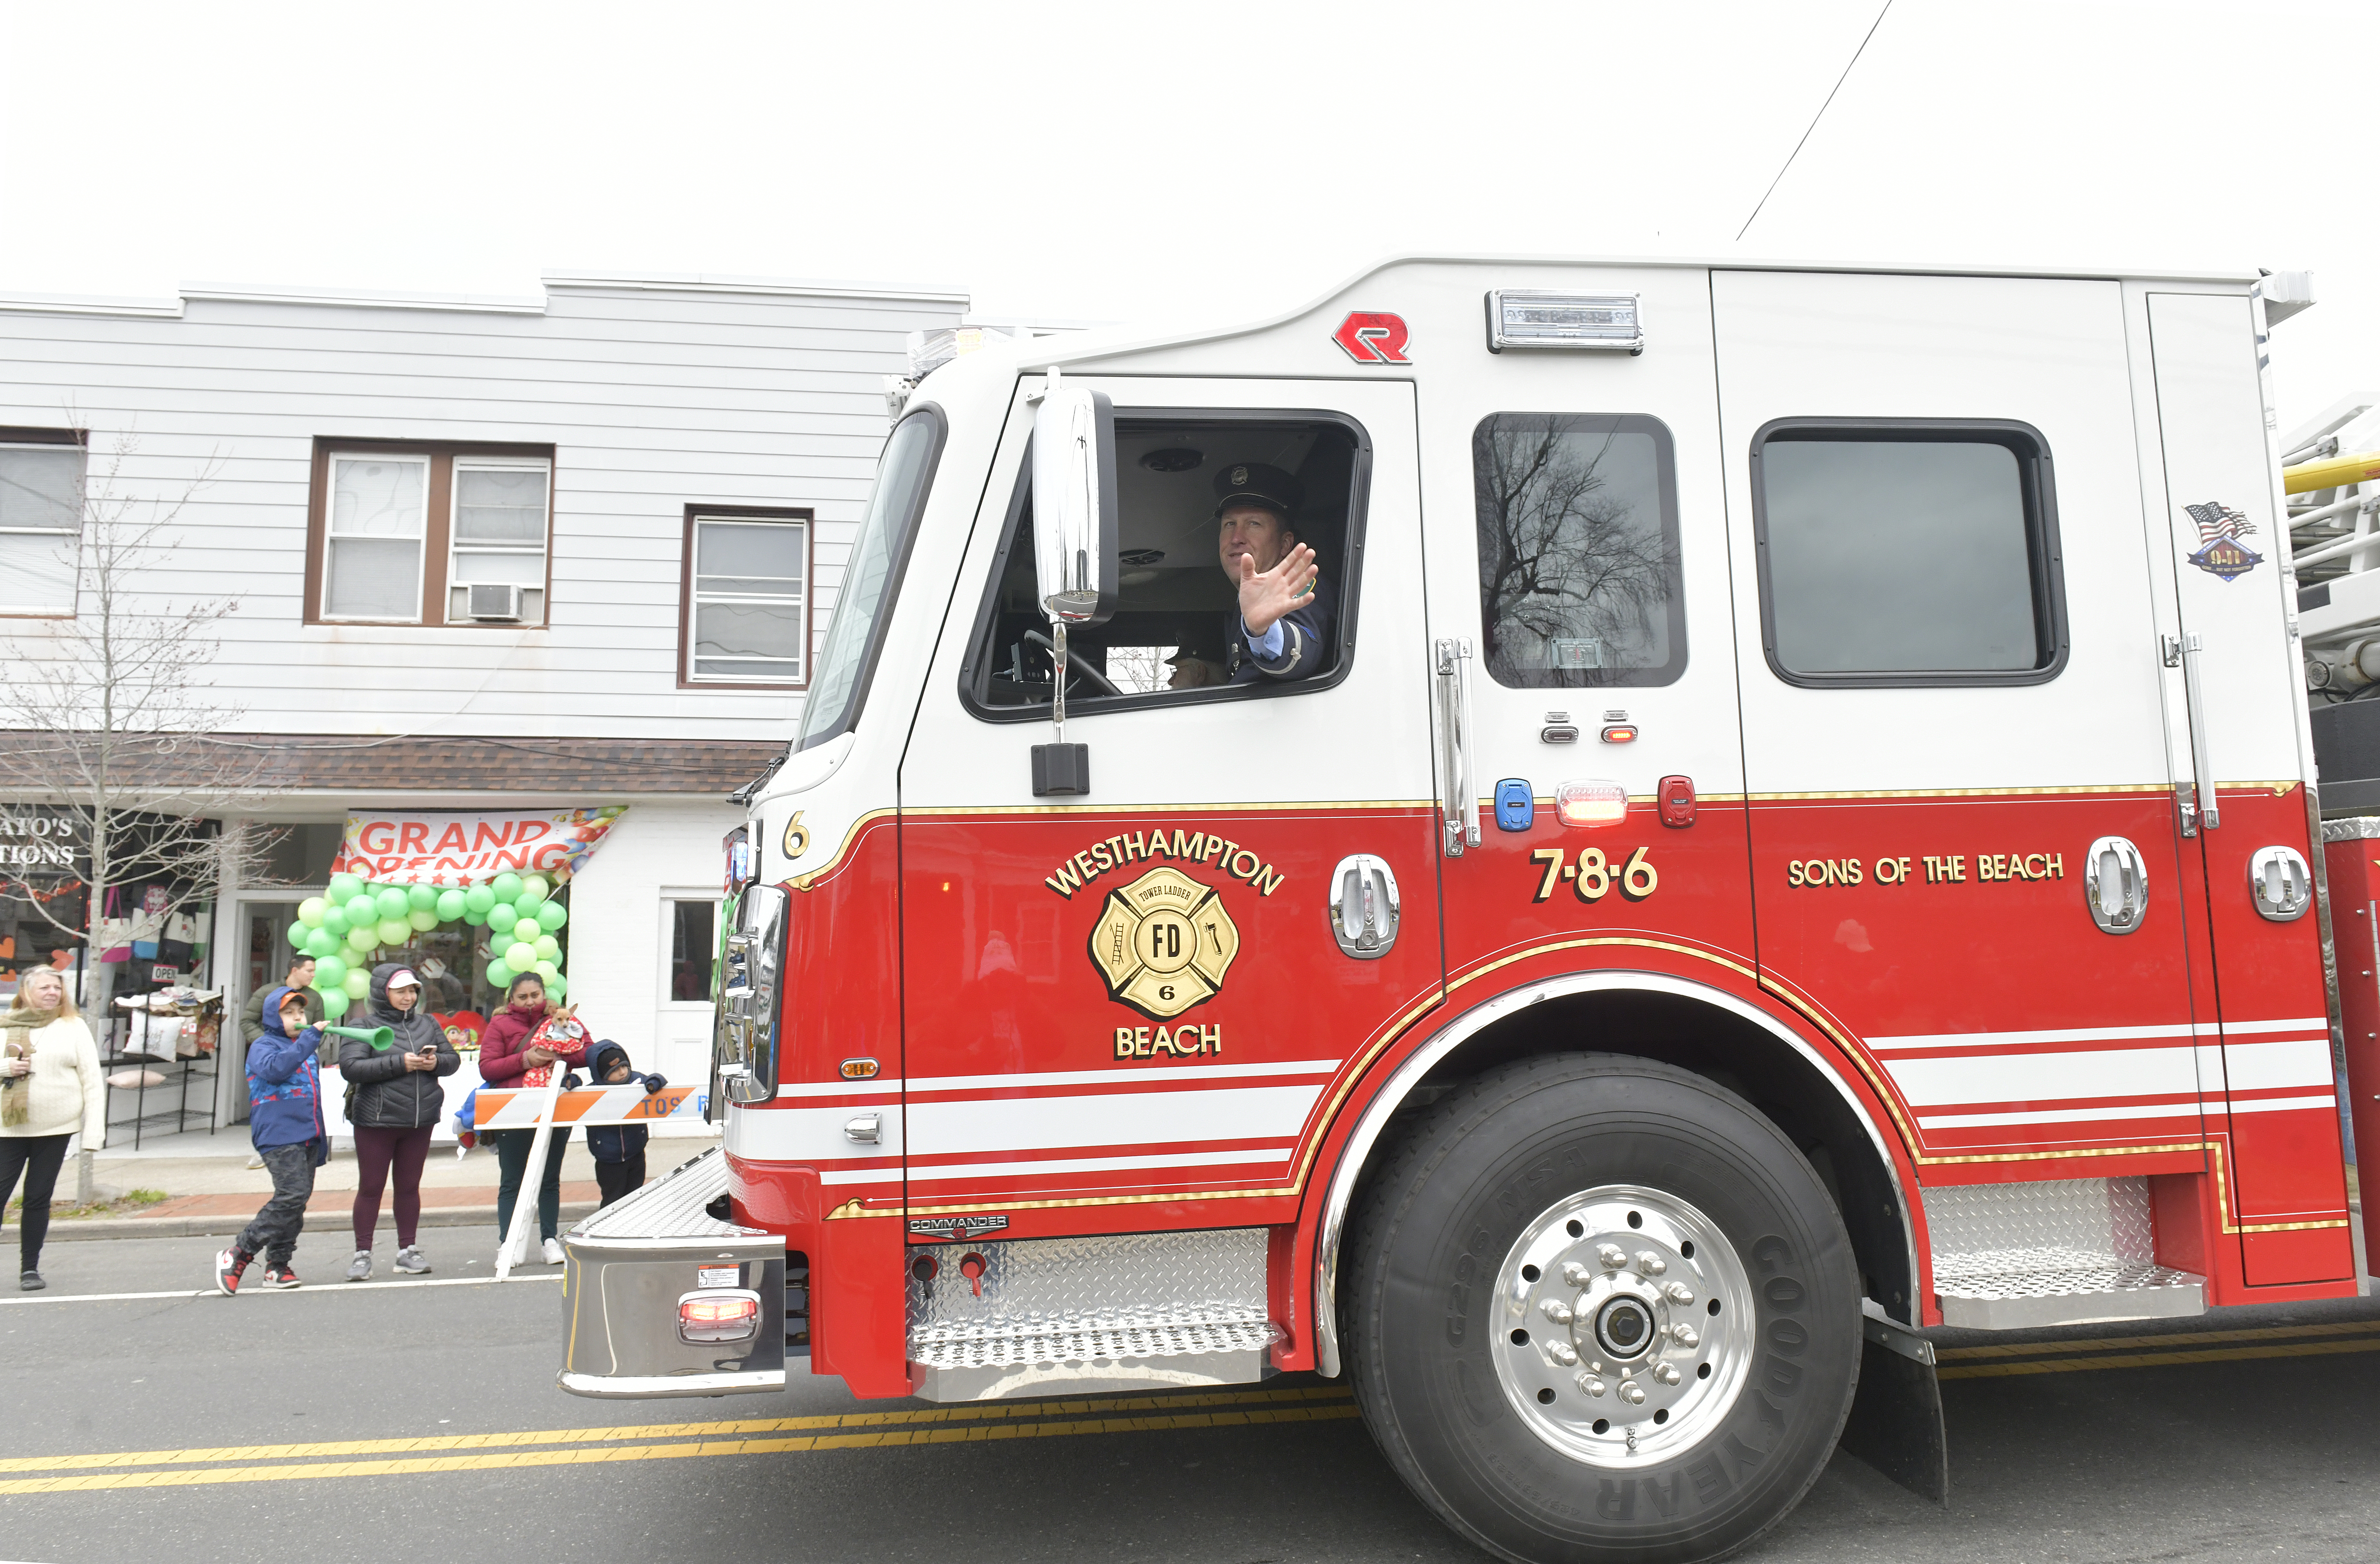 The Westhampton Beach fire Department.